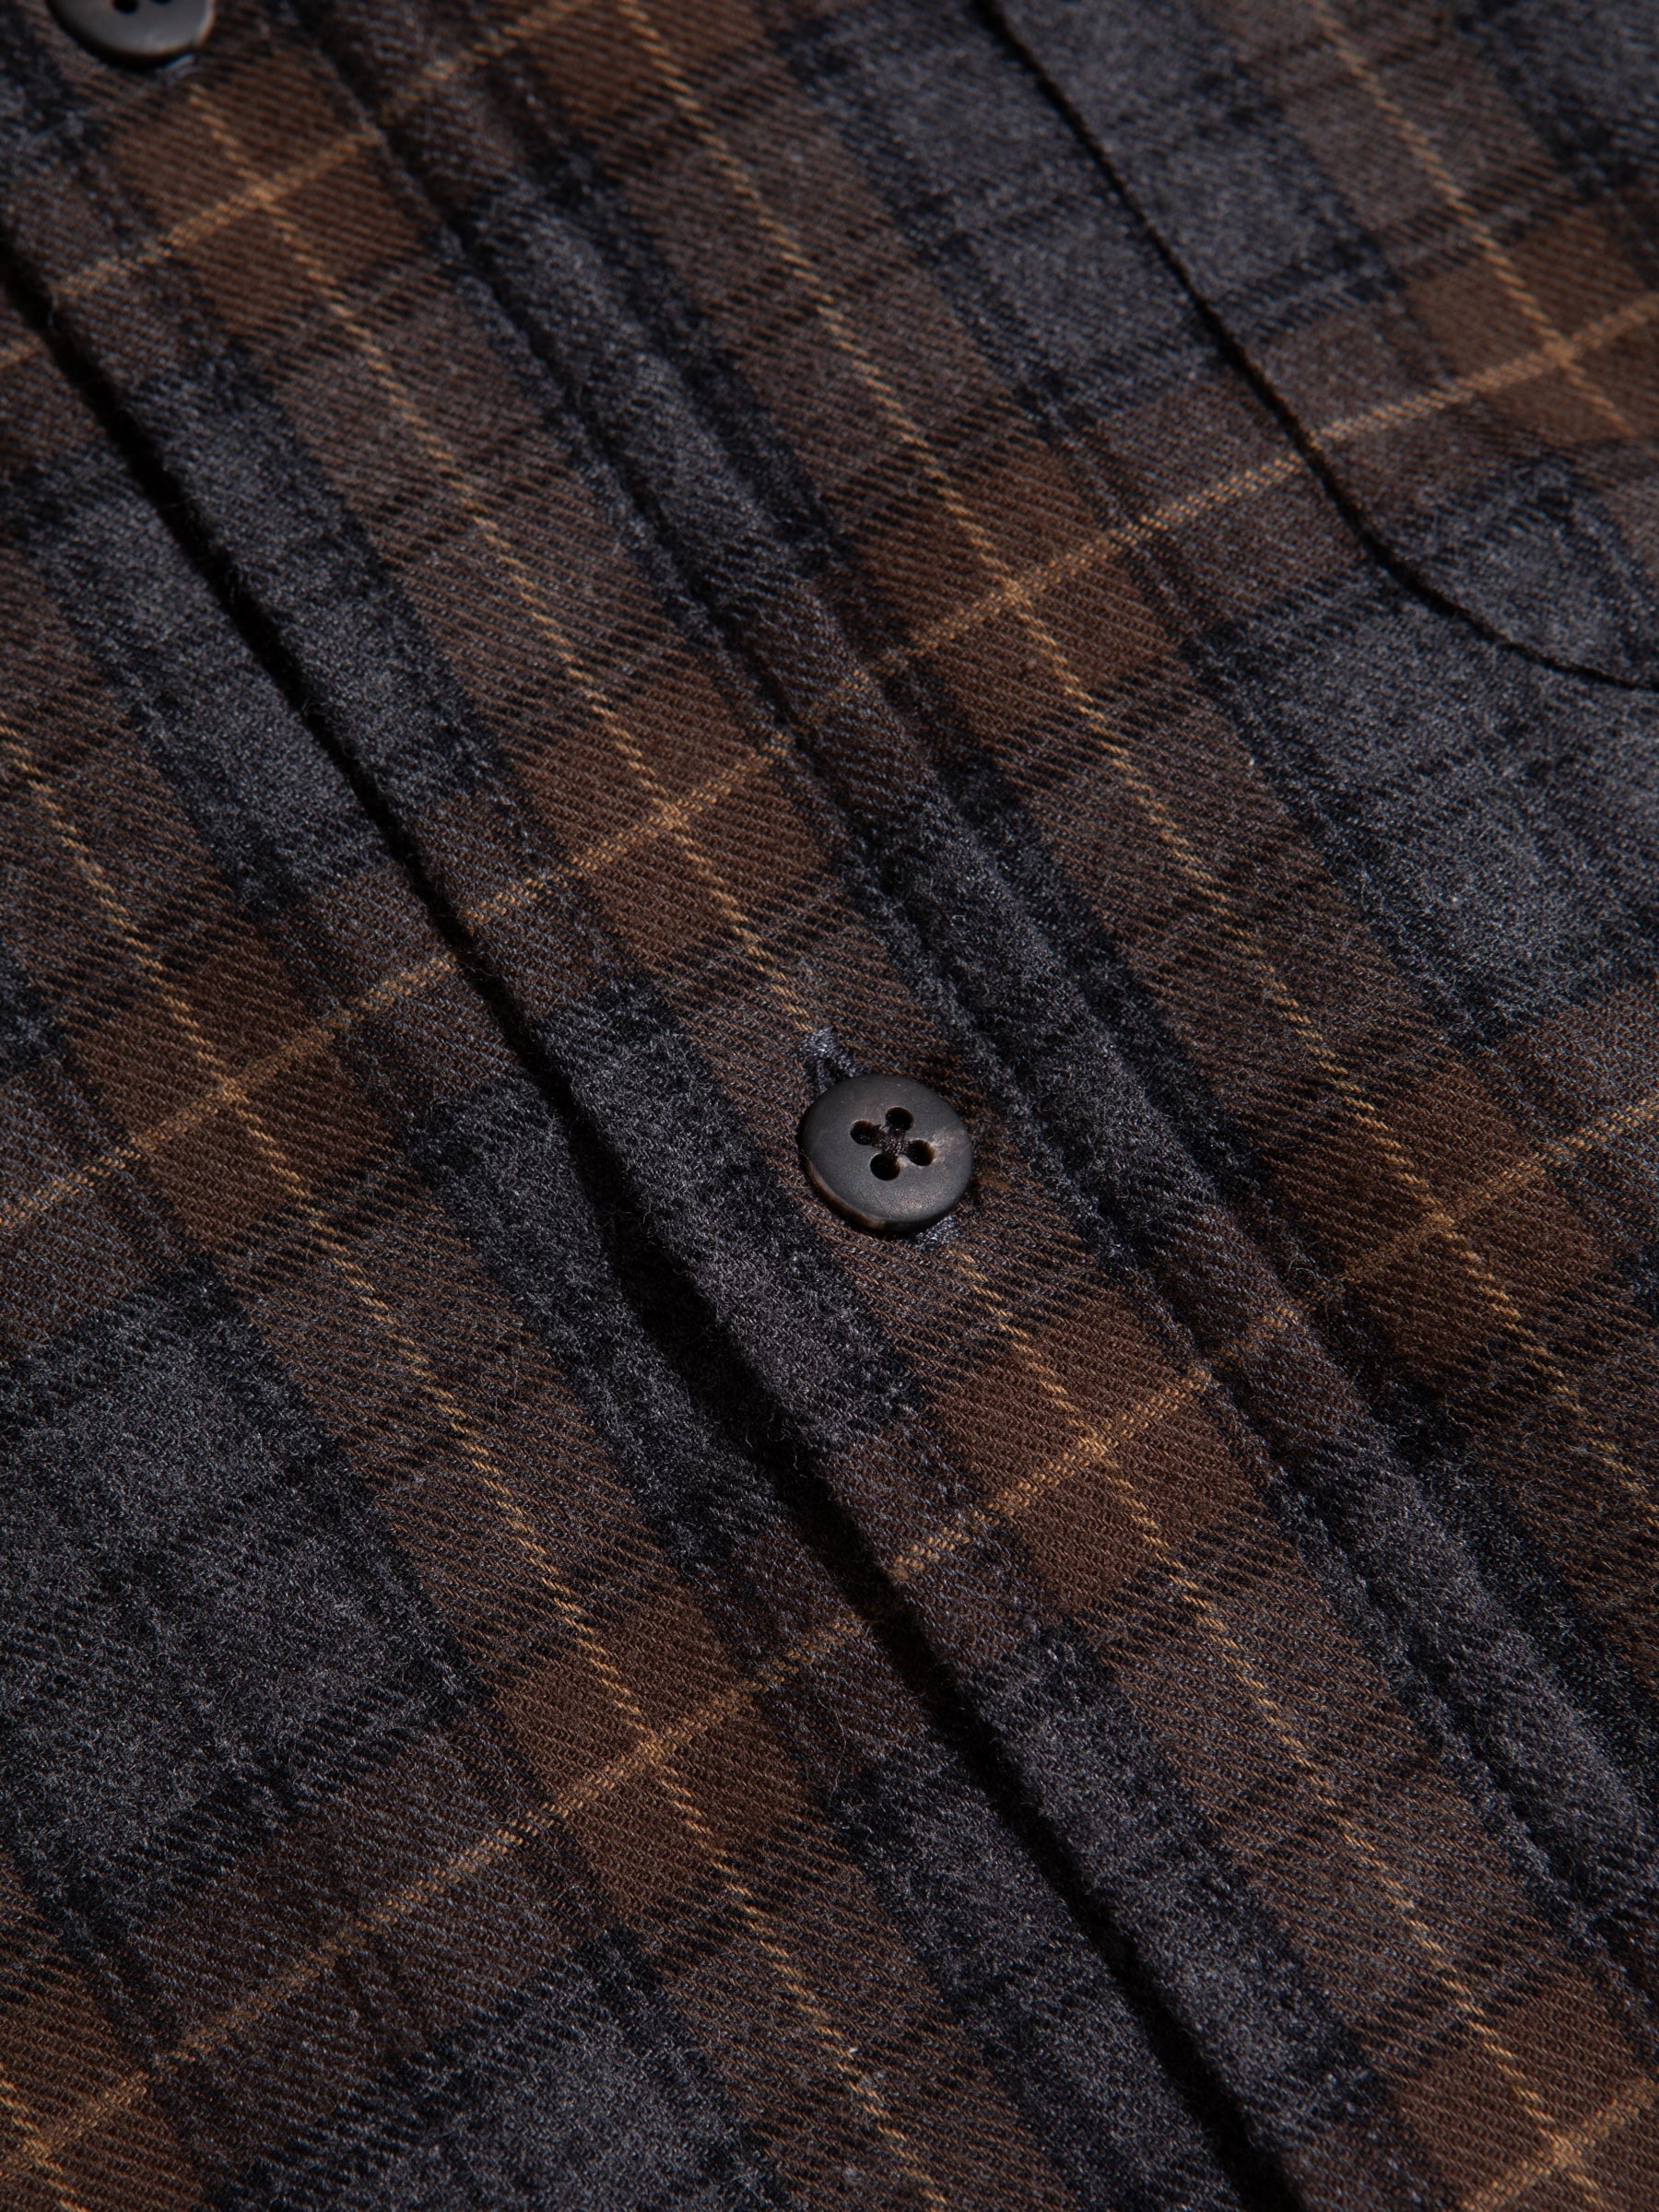 A Japanese Brushed Cotton material used to make a plaid check flannel shirt.